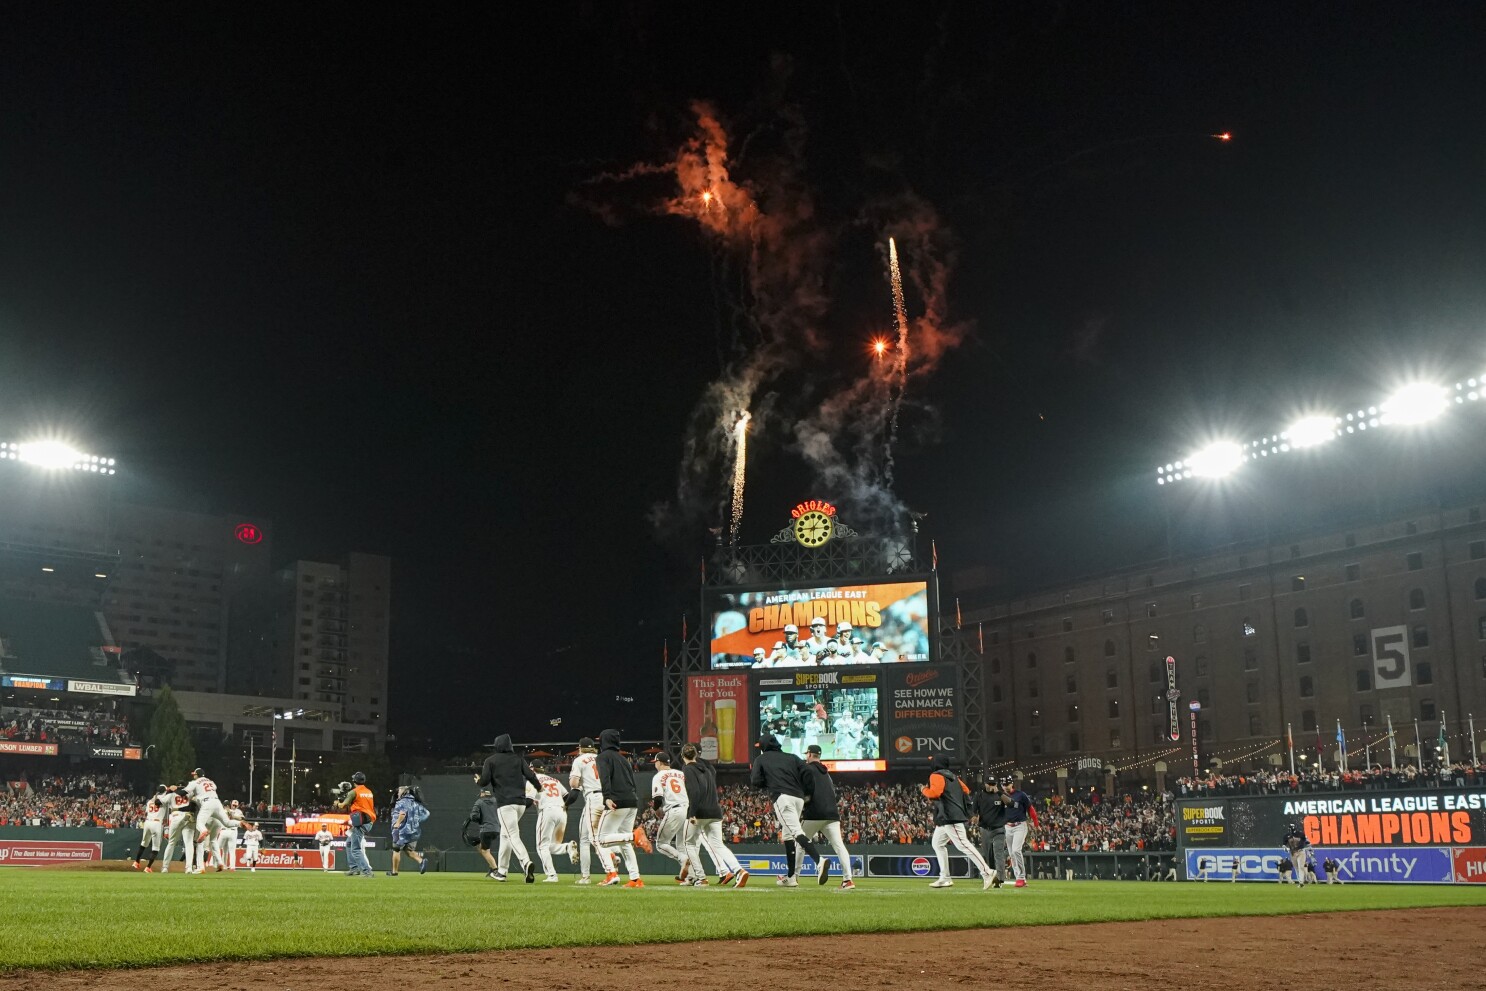 Baltimore Orioles announce new 30-year deal to stay at Camden Yards